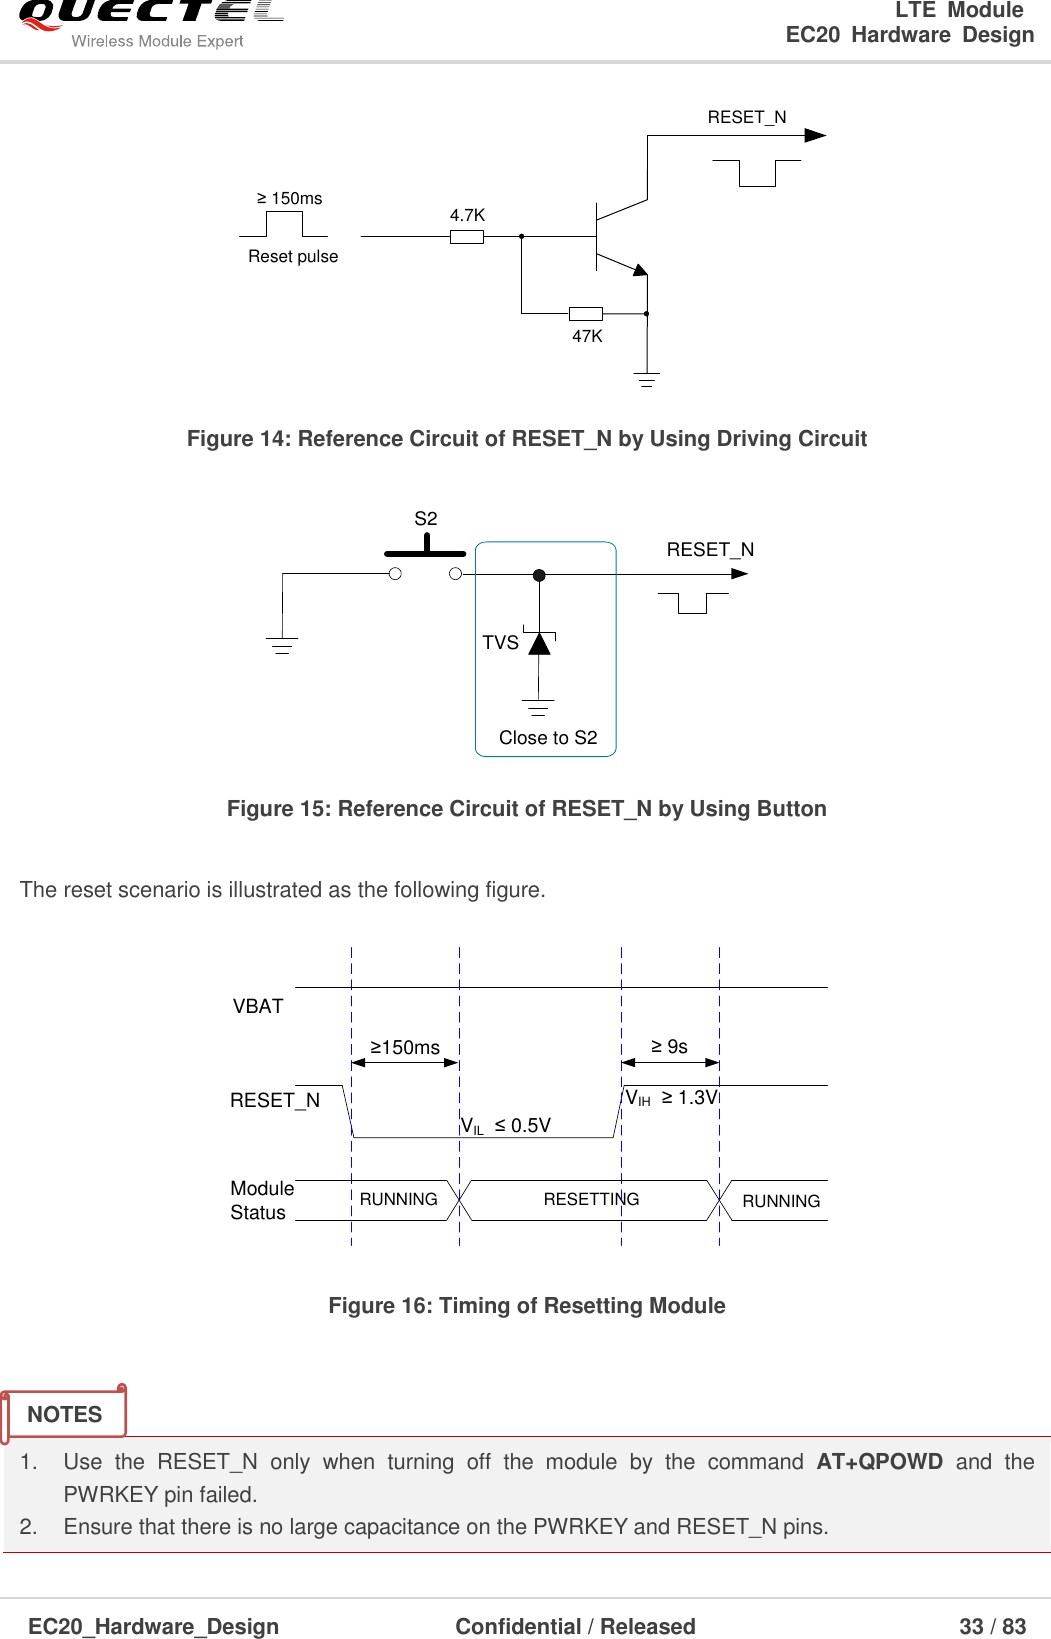                                                                        LTE  Module                                                                   EC20  Hardware  Design  EC20_Hardware_Design                  Confidential / Released                            33 / 83     Reset pulseRESET_N4.7K47K≥ 150ms Figure 14: Reference Circuit of RESET_N by Using Driving Circuit  RESET_NS2Close to S2TVS Figure 15: Reference Circuit of RESET_N by Using Button  The reset scenario is illustrated as the following figure. VIL  ≤ 0.5VVIH  ≥ 1.3VVBAT≥150msRESETTINGModule Status RUNNINGRESET_NRUNNING≥ 9s Figure 16: Timing of Resetting Module   1.  Use  the  RESET_N  only  when  turning  off  the  module  by  the  command  AT+QPOWD  and  the PWRKEY pin failed.   2.  Ensure that there is no large capacitance on the PWRKEY and RESET_N pins. NOTES 